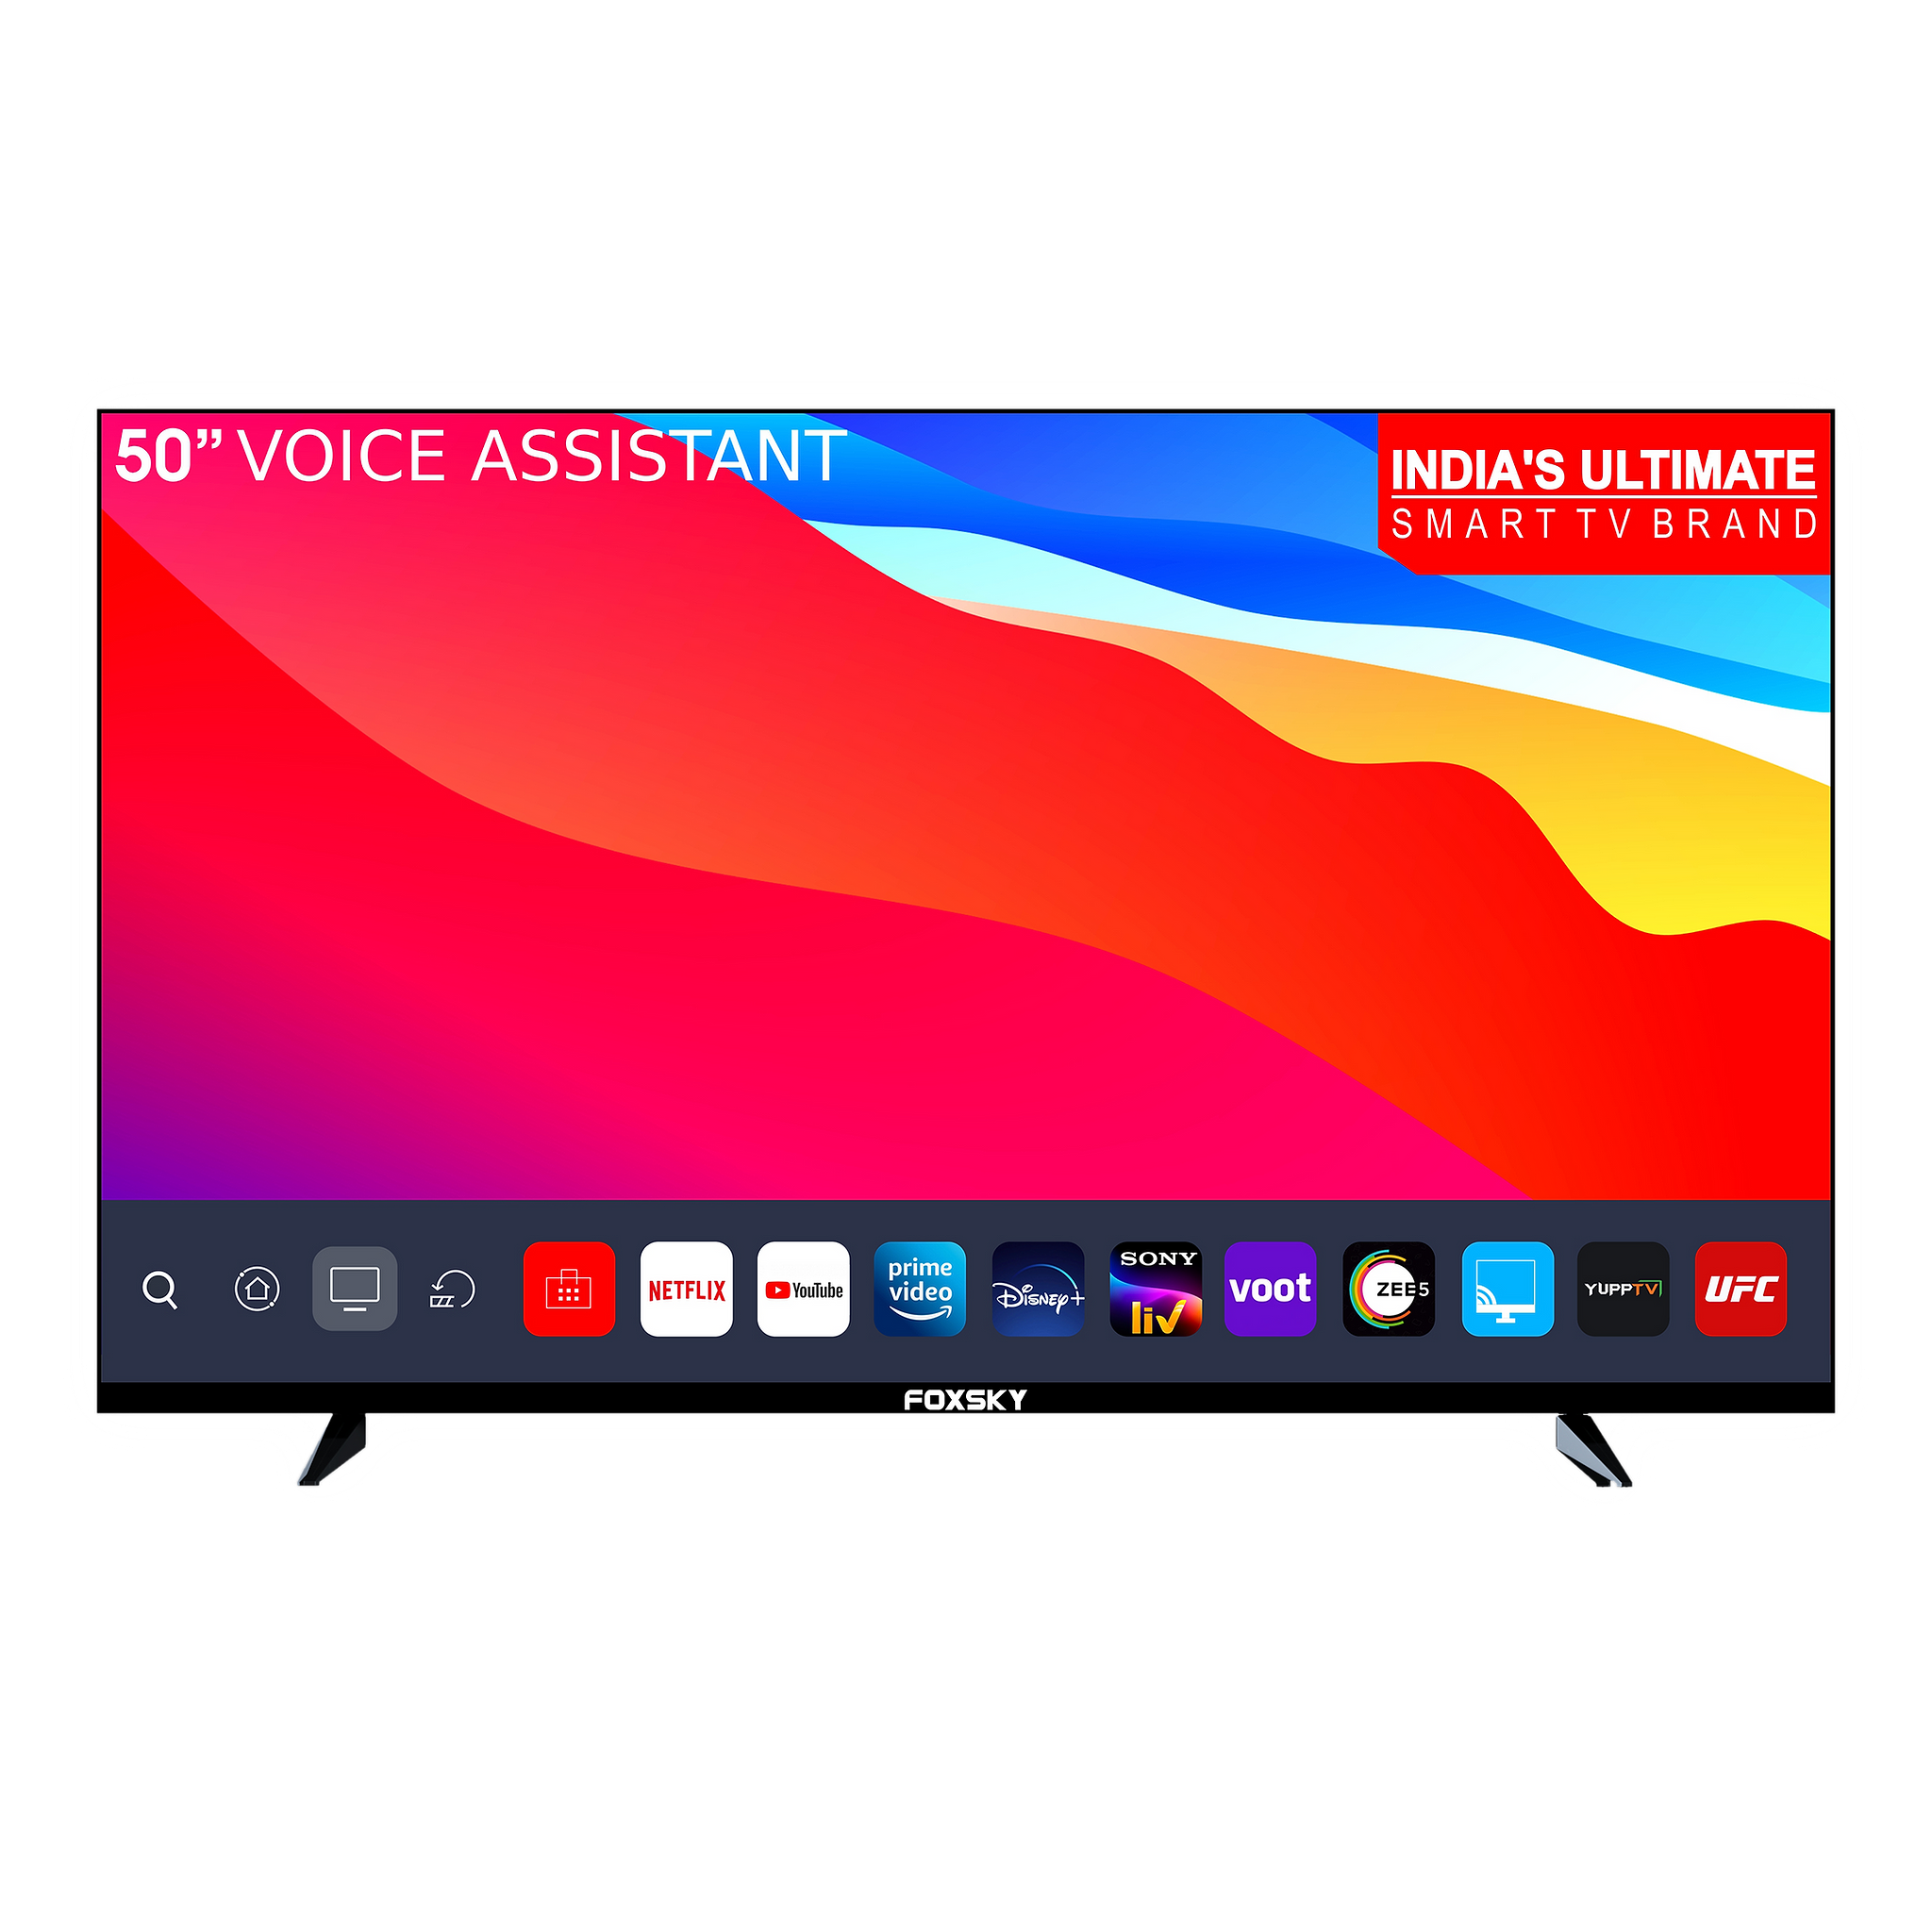 Foxsky 127 cm (50 inch) 4K Ultra HD LED Android TV with Google Assistant (2021 model)